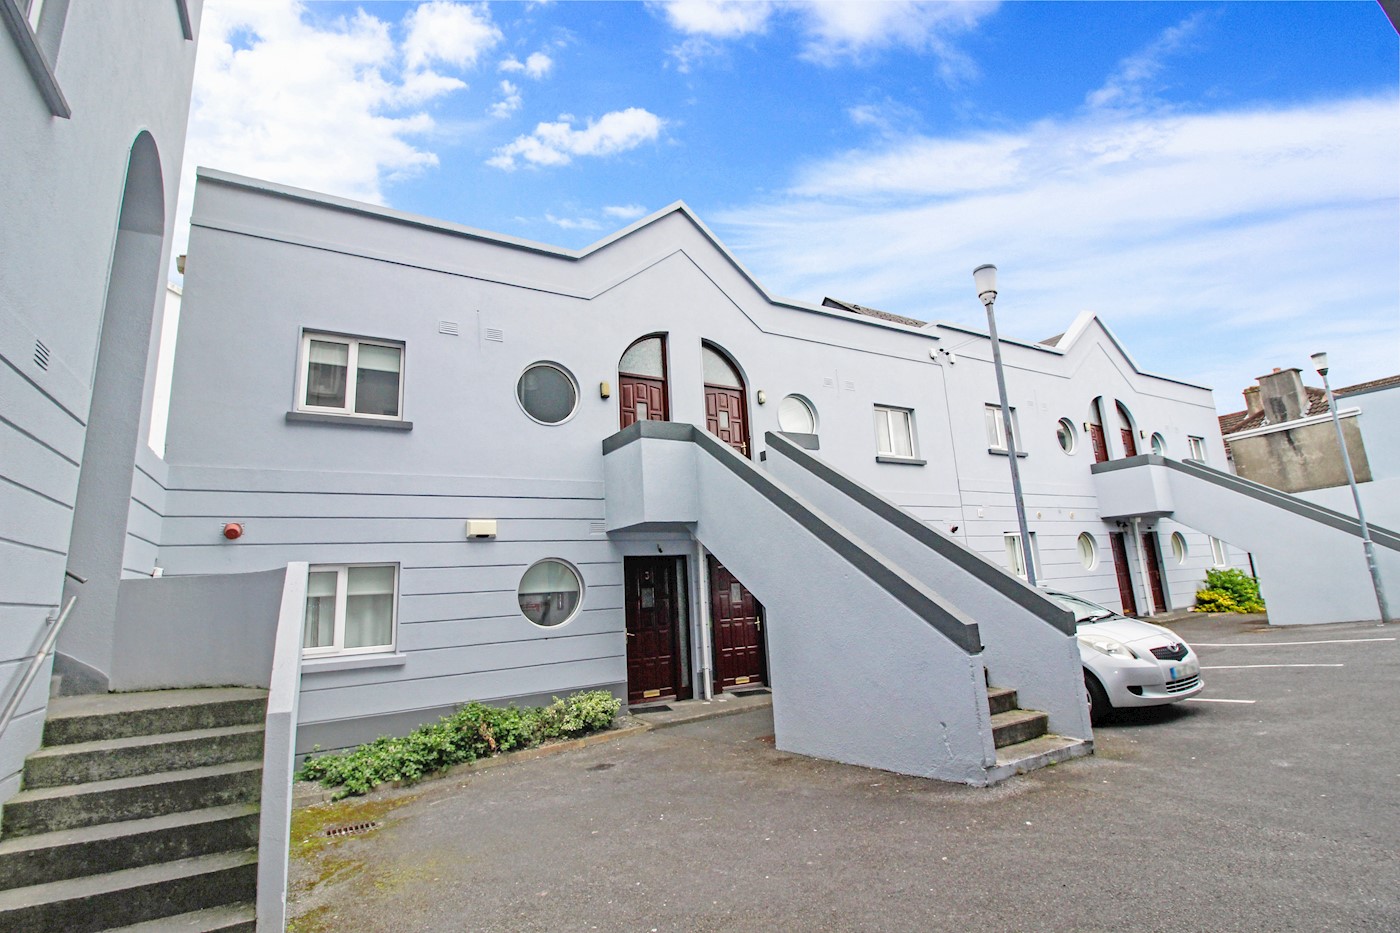 Apartment 8, Drum Ard, Prospect Hill, Co. Galway, H91 PDE5 1/5